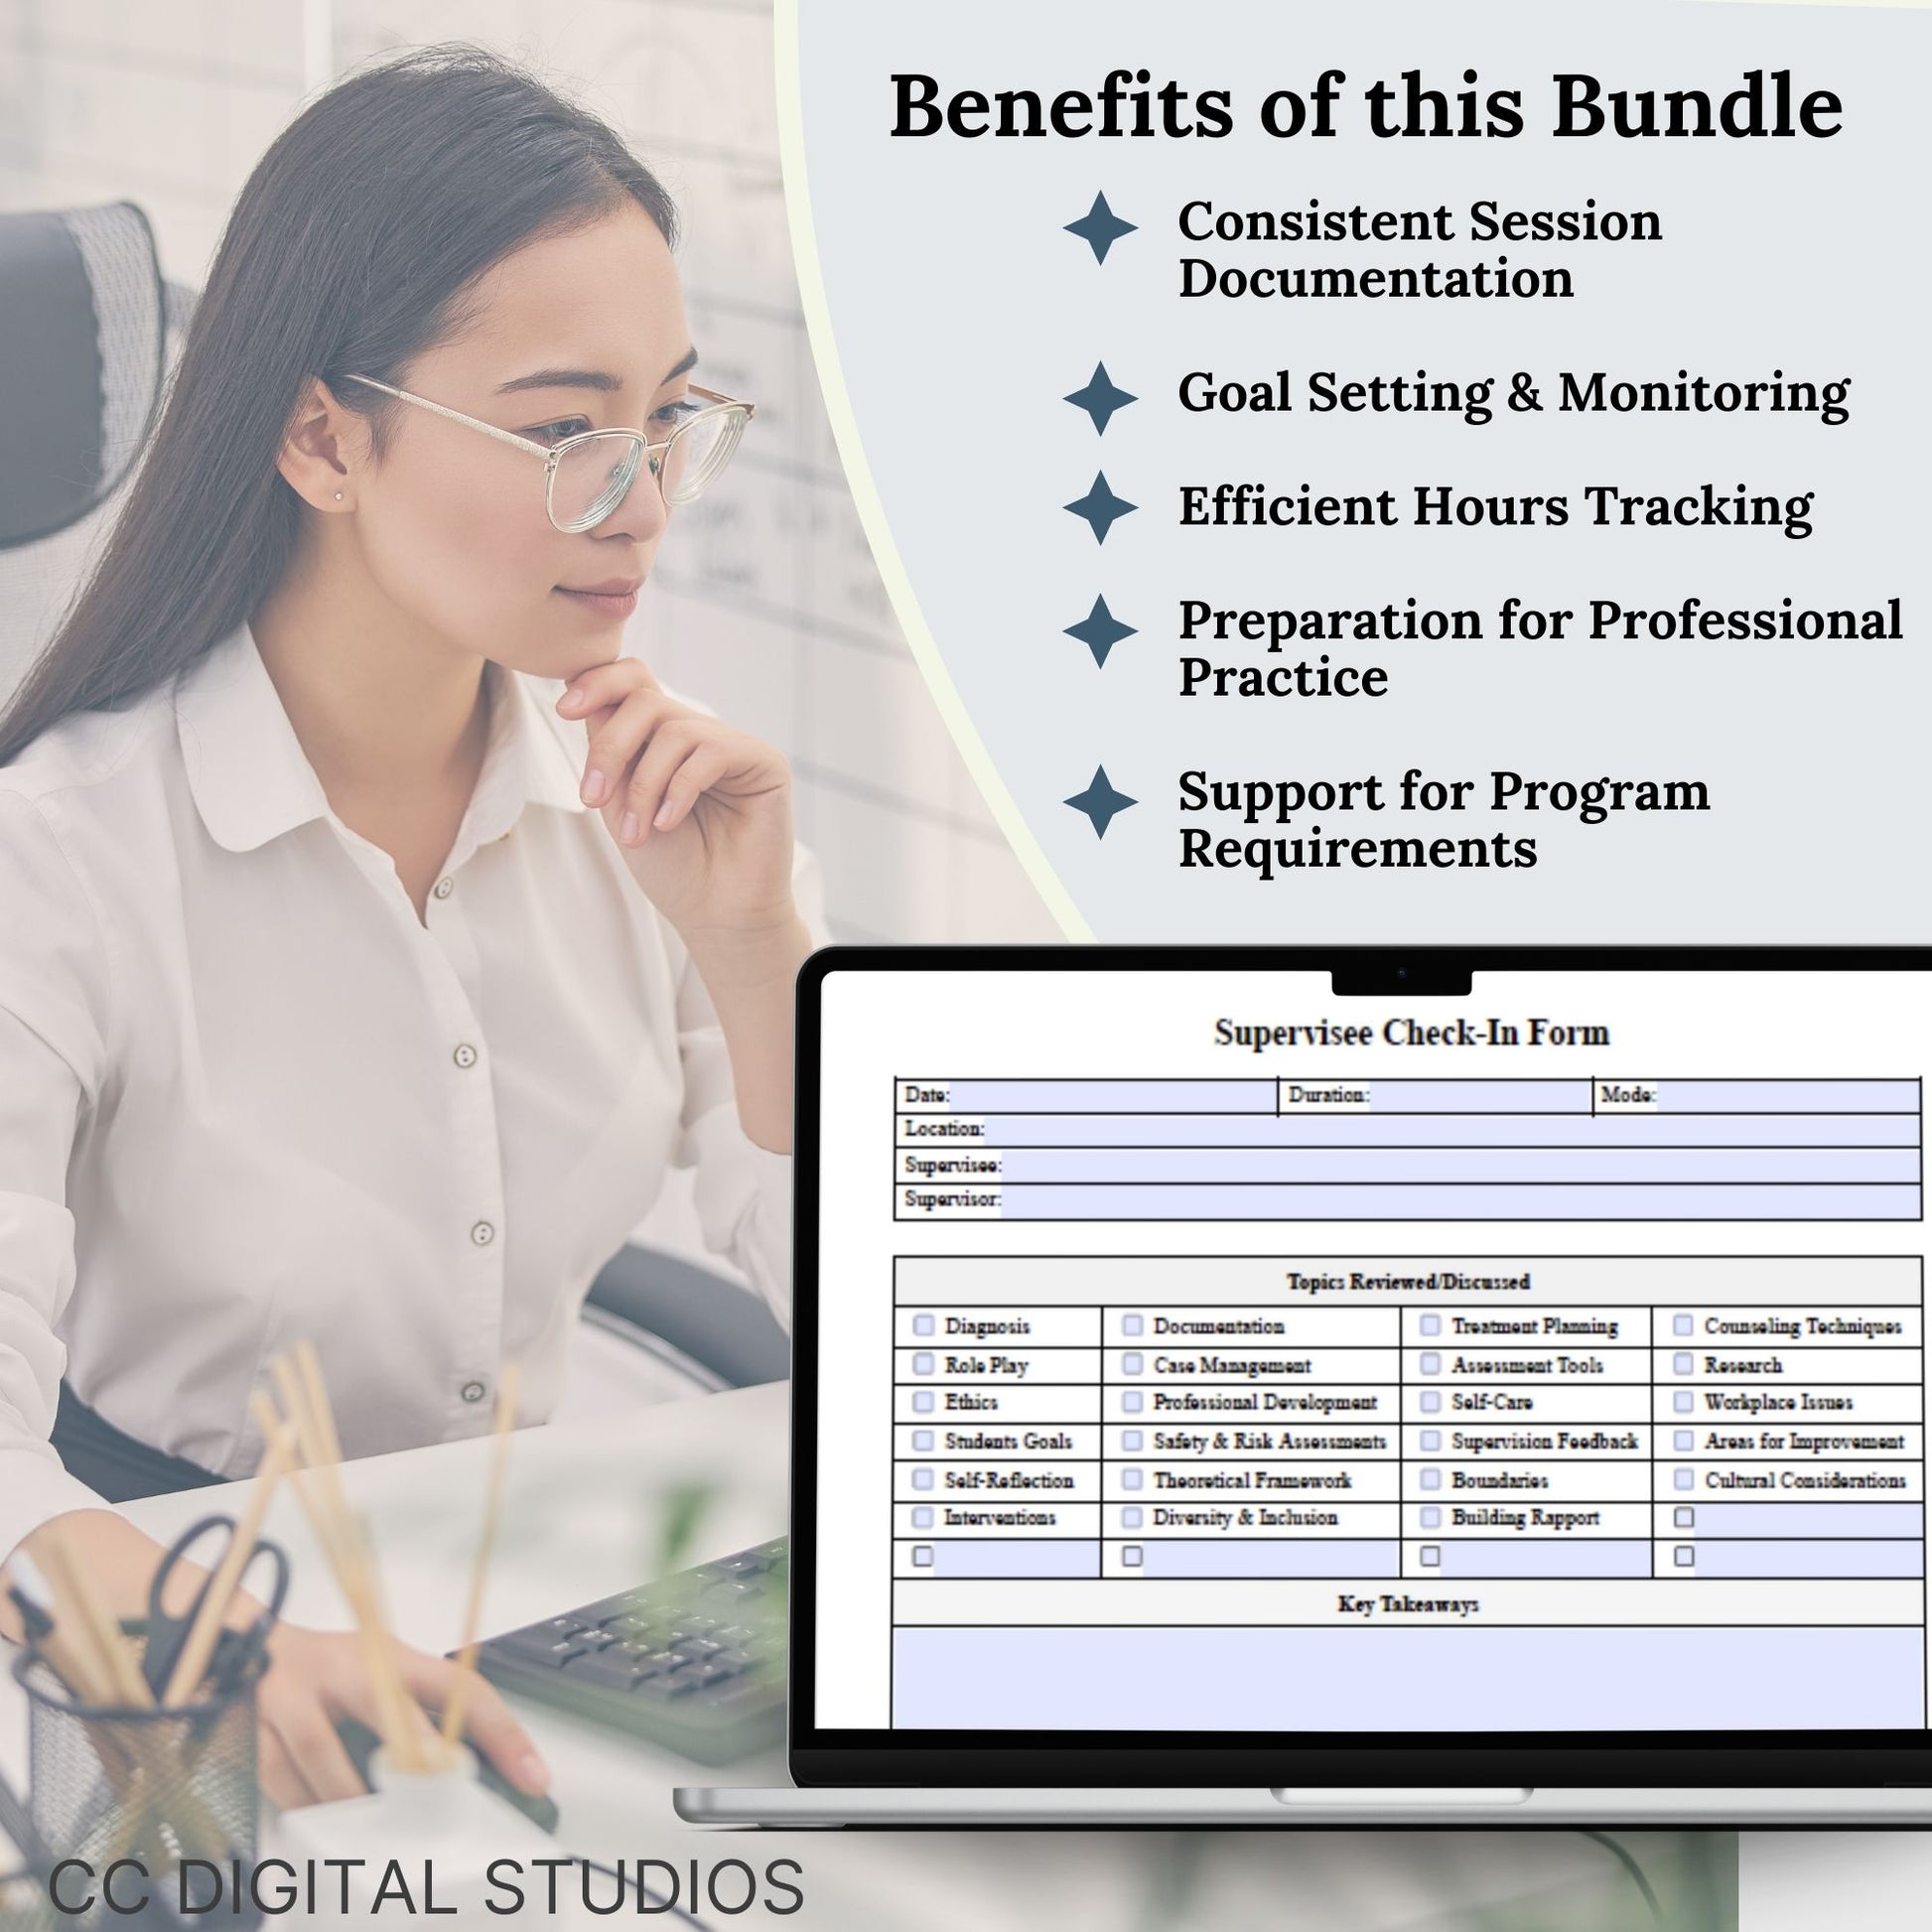 Elevate your counseling practicum or internship experience with our toolkit featuring Google Doc hours logs, supervision forms, supervision notes therapy templates. 280 self-reflections questions to ensure internship preparedness